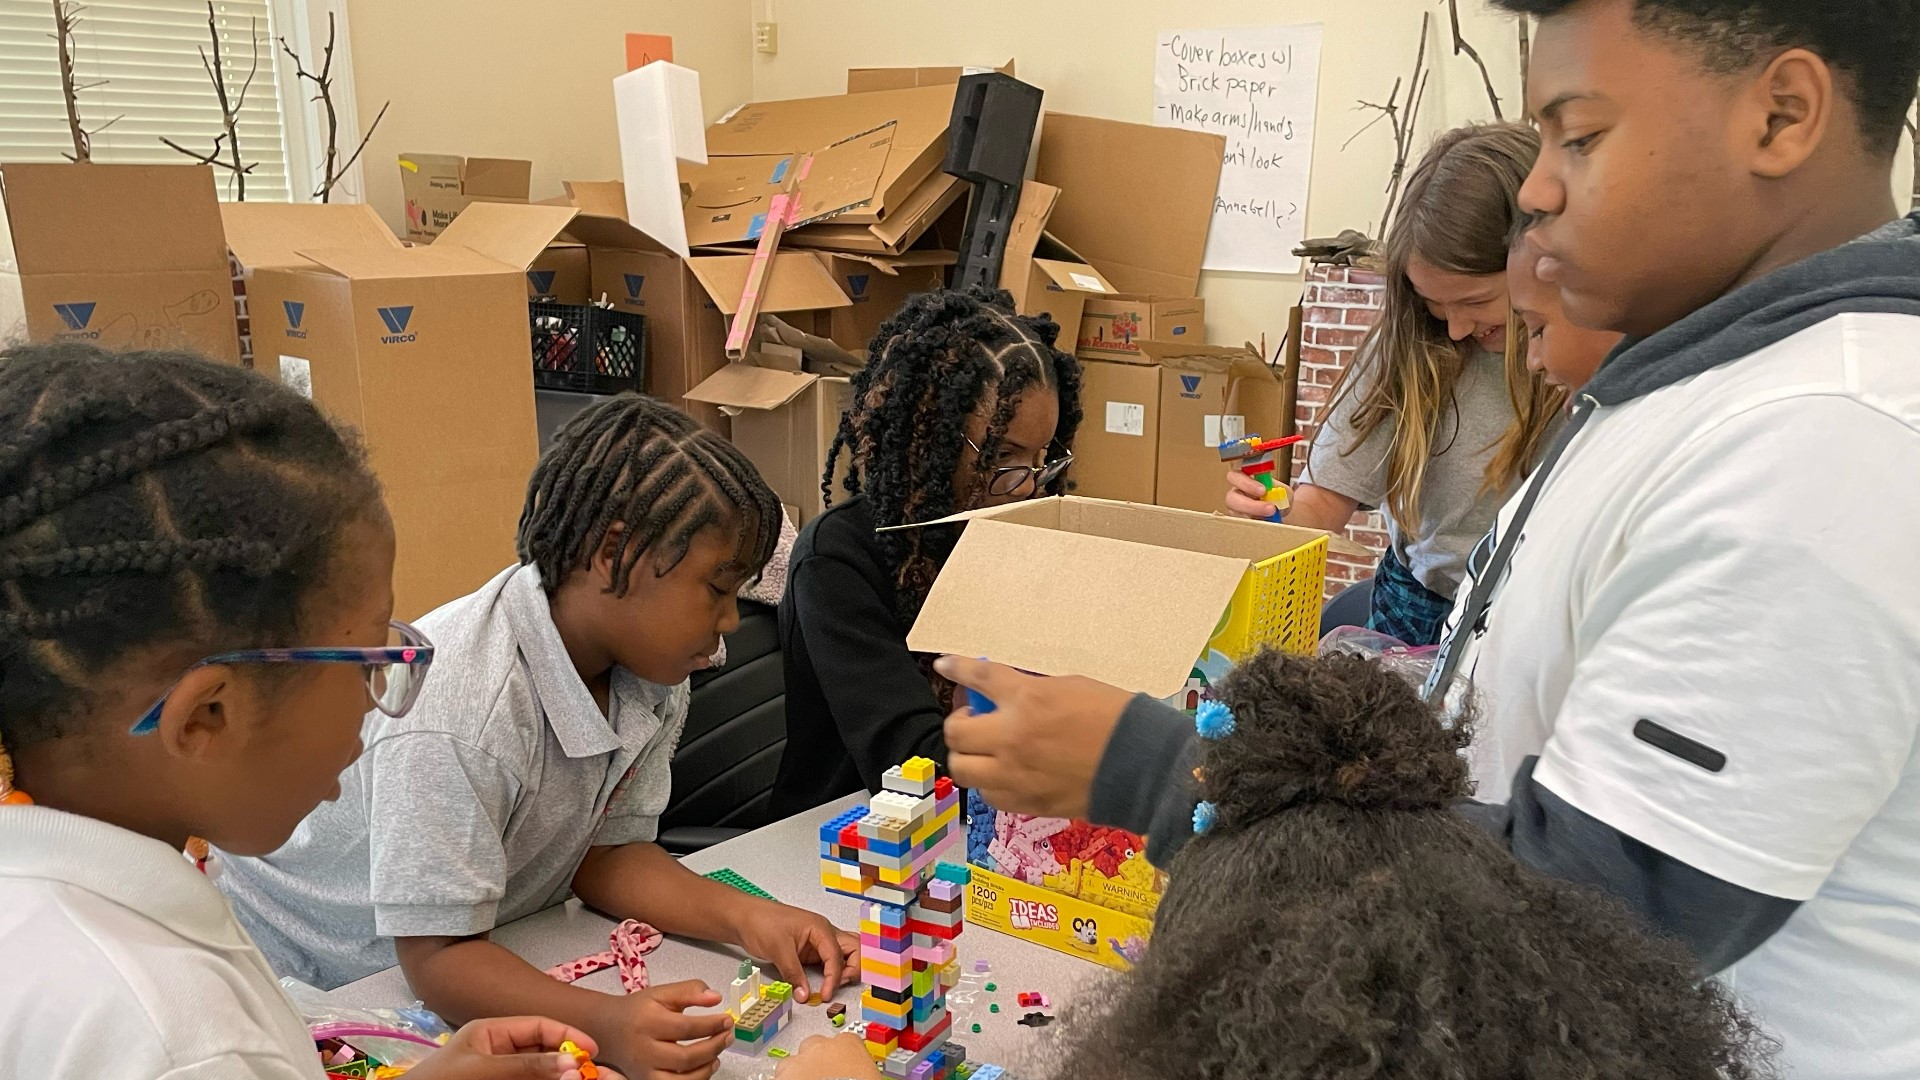 The Youth Leadership Institute, a department within the Columbus Urban League, is focused on delving into the kids' interests, such as science, technology and art.